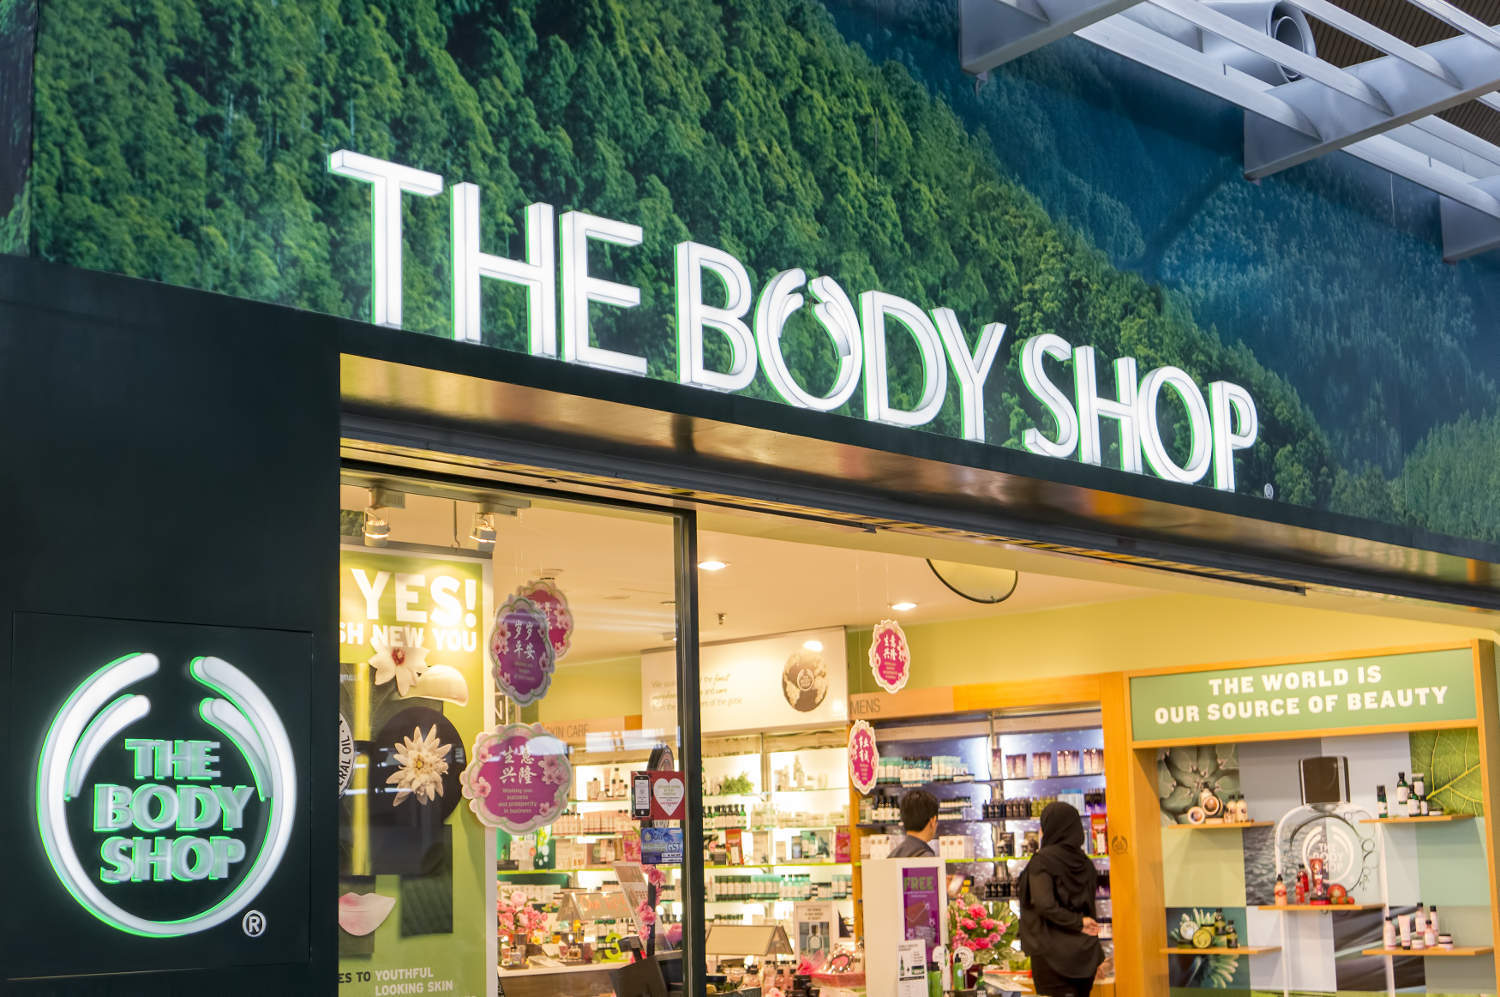 The Body Shop Is Set For Demise Unless It Freshens Up - Verdict